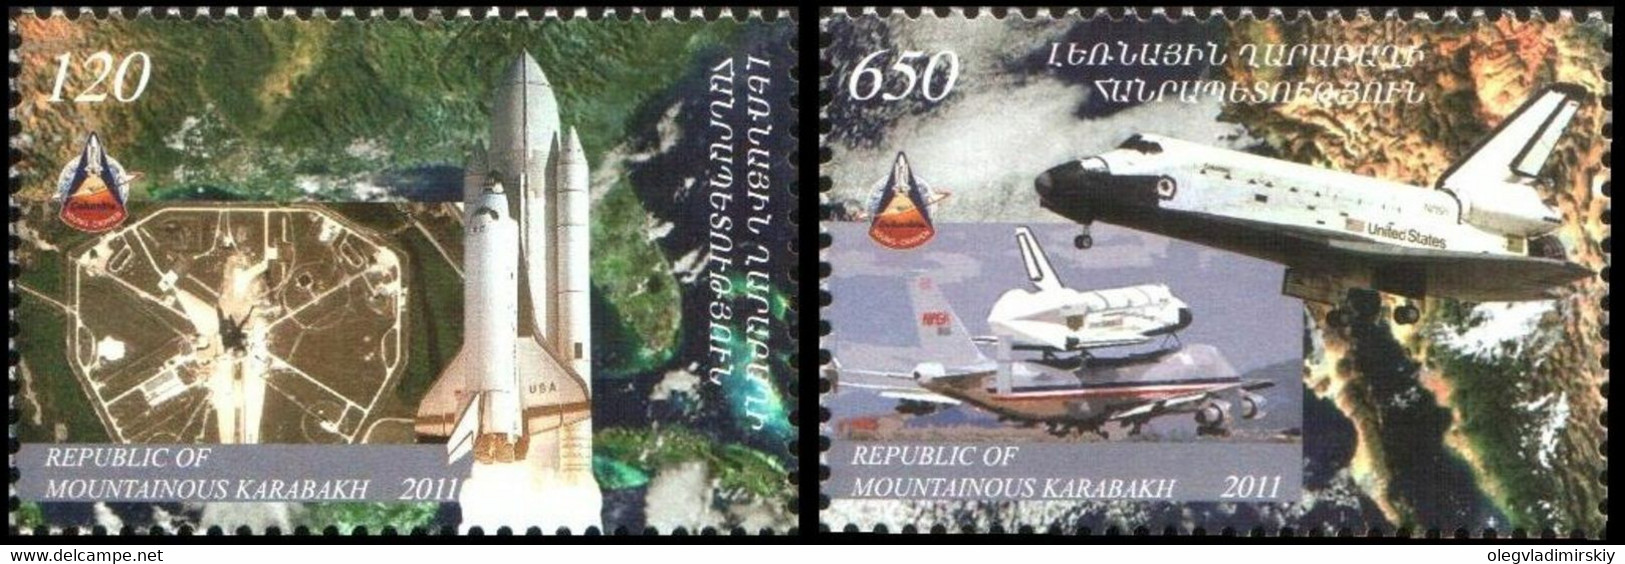 Armenia Mountain Karabakh Artsakh 2011 30th Anniversary Of The First Space Shuttle Launch Set Of 2 Stamps Mint - USA